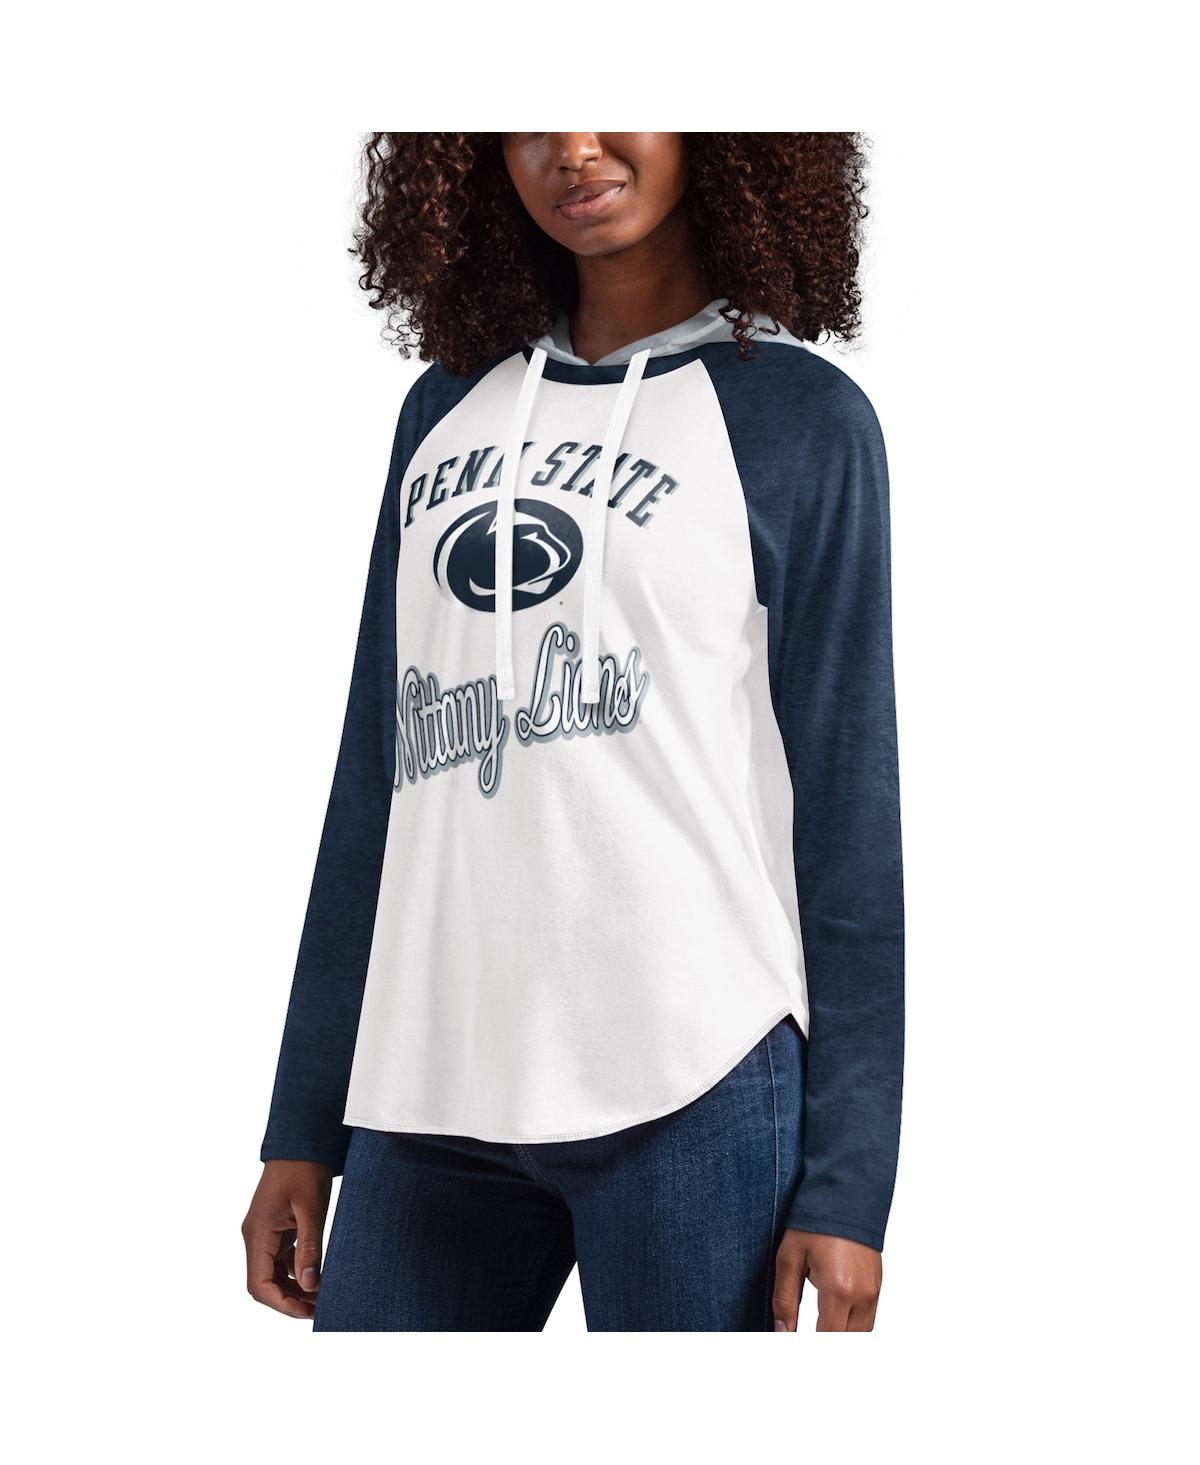 Women's G-iii 4Her by Carl Banks White, Navy Penn State Nittany Lions From the Sideline Raglan Long Sleeve Hoodie T-shirt - White, Navy